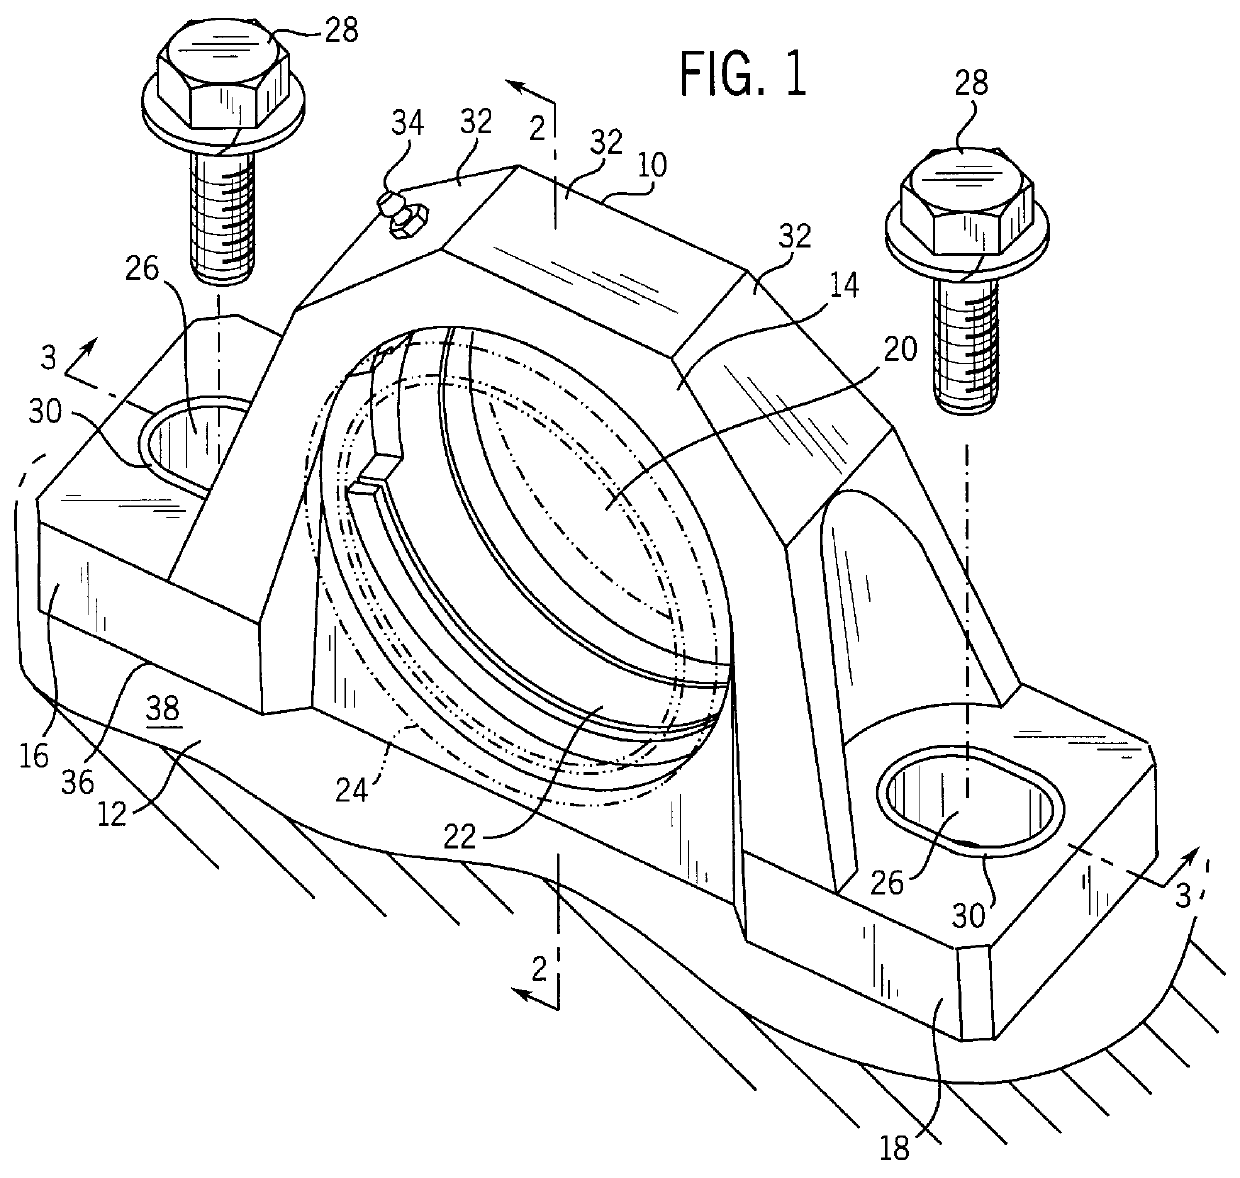 Molded polymeric bearing housing and method for making same